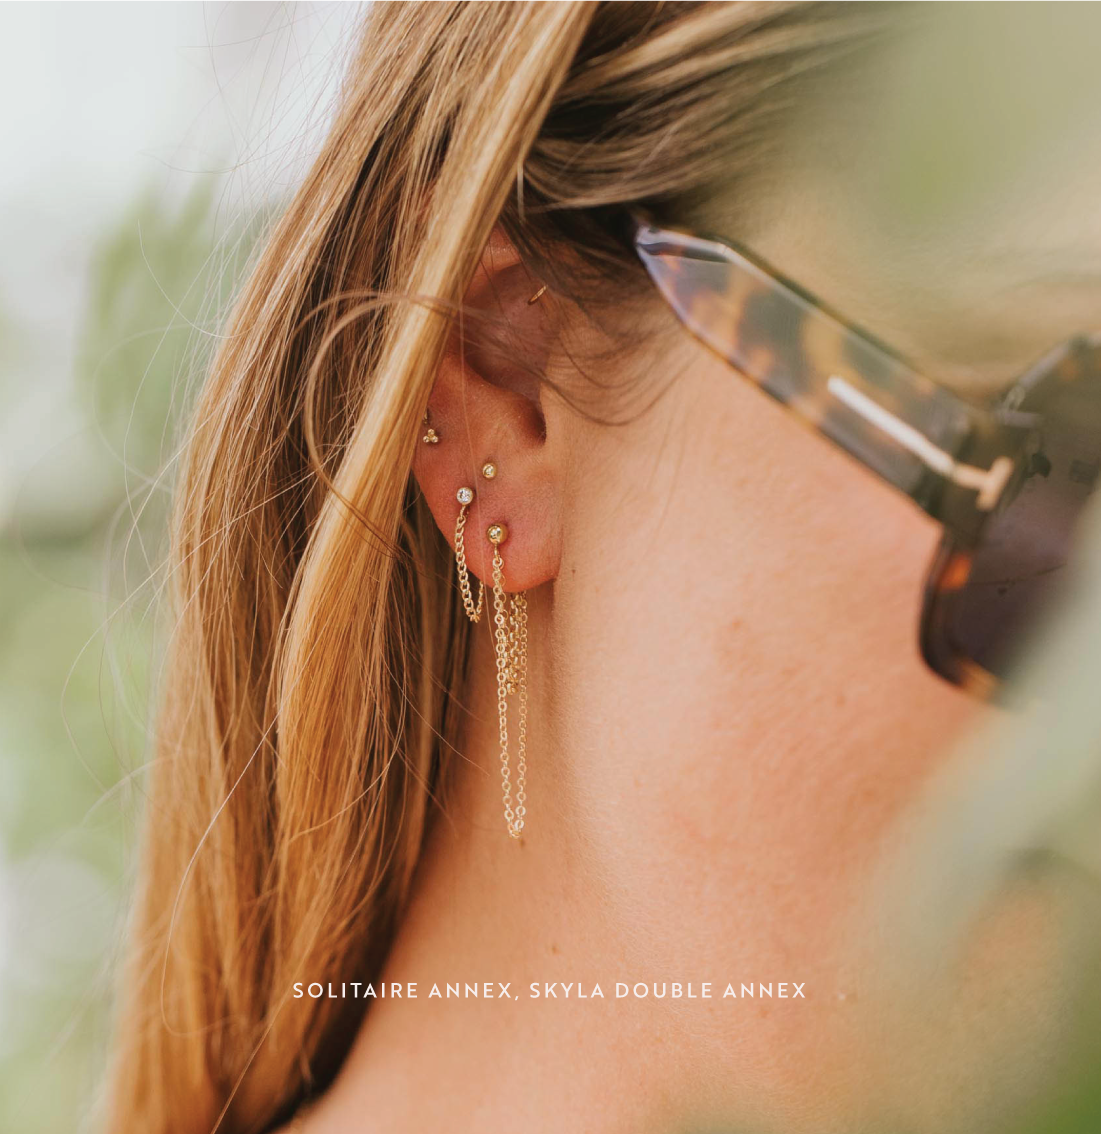 Jess' earring stack for summer jewelry including gold ball stud earrings, solitaire annex, and skyla double annex earrings.